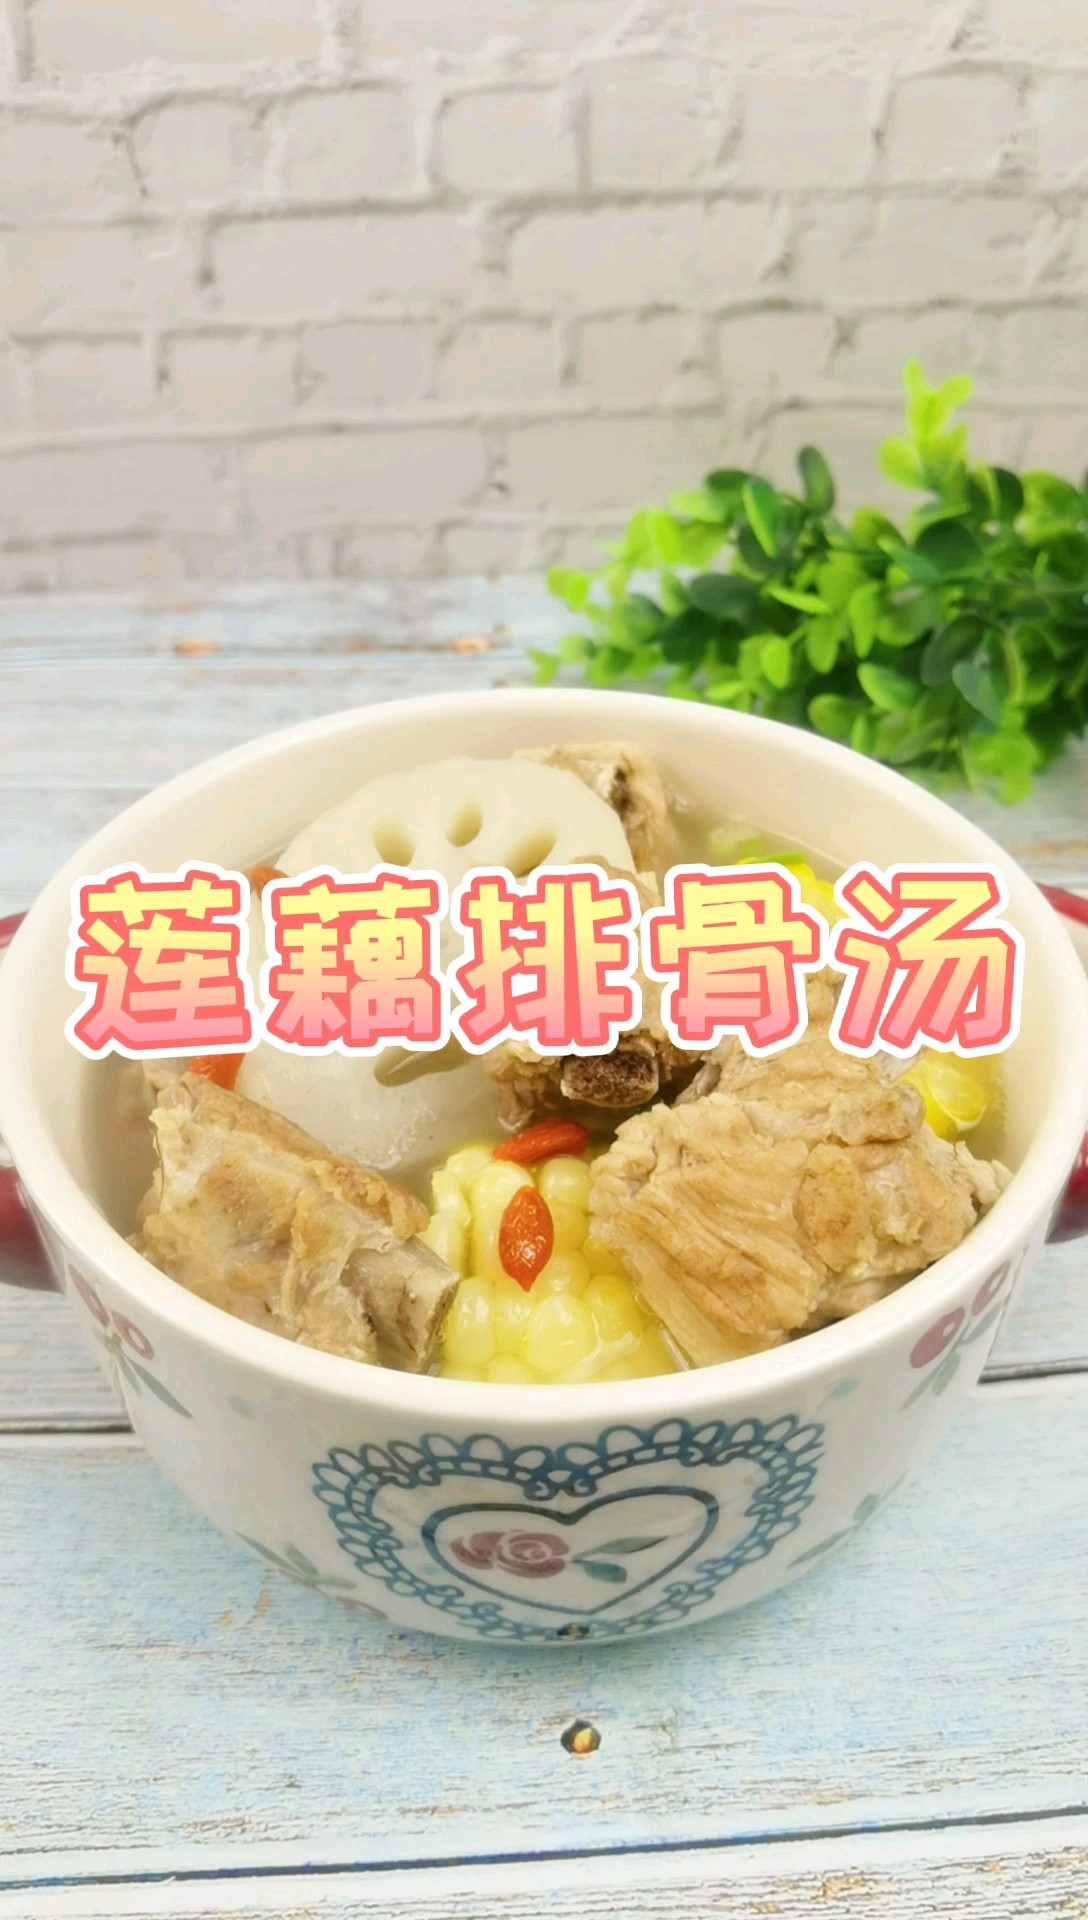 "chen Qing Ling" Wei Wuxian's Favorite Soup with Lotus Root Ribs